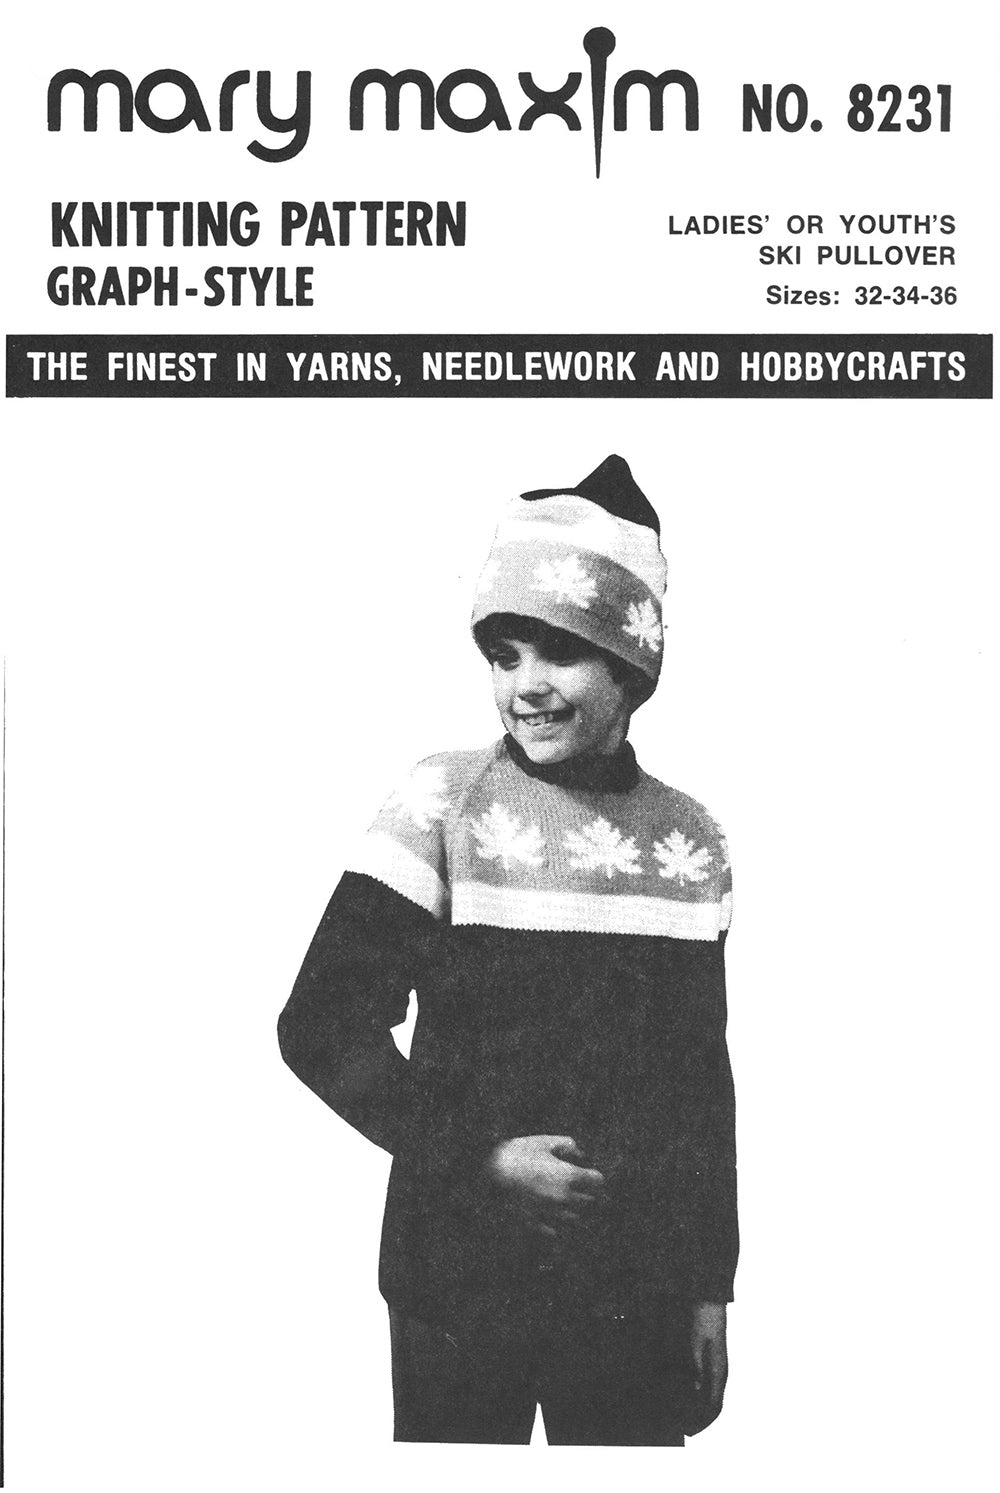 Ladies' Or Youth's Ski Pullover Pattern